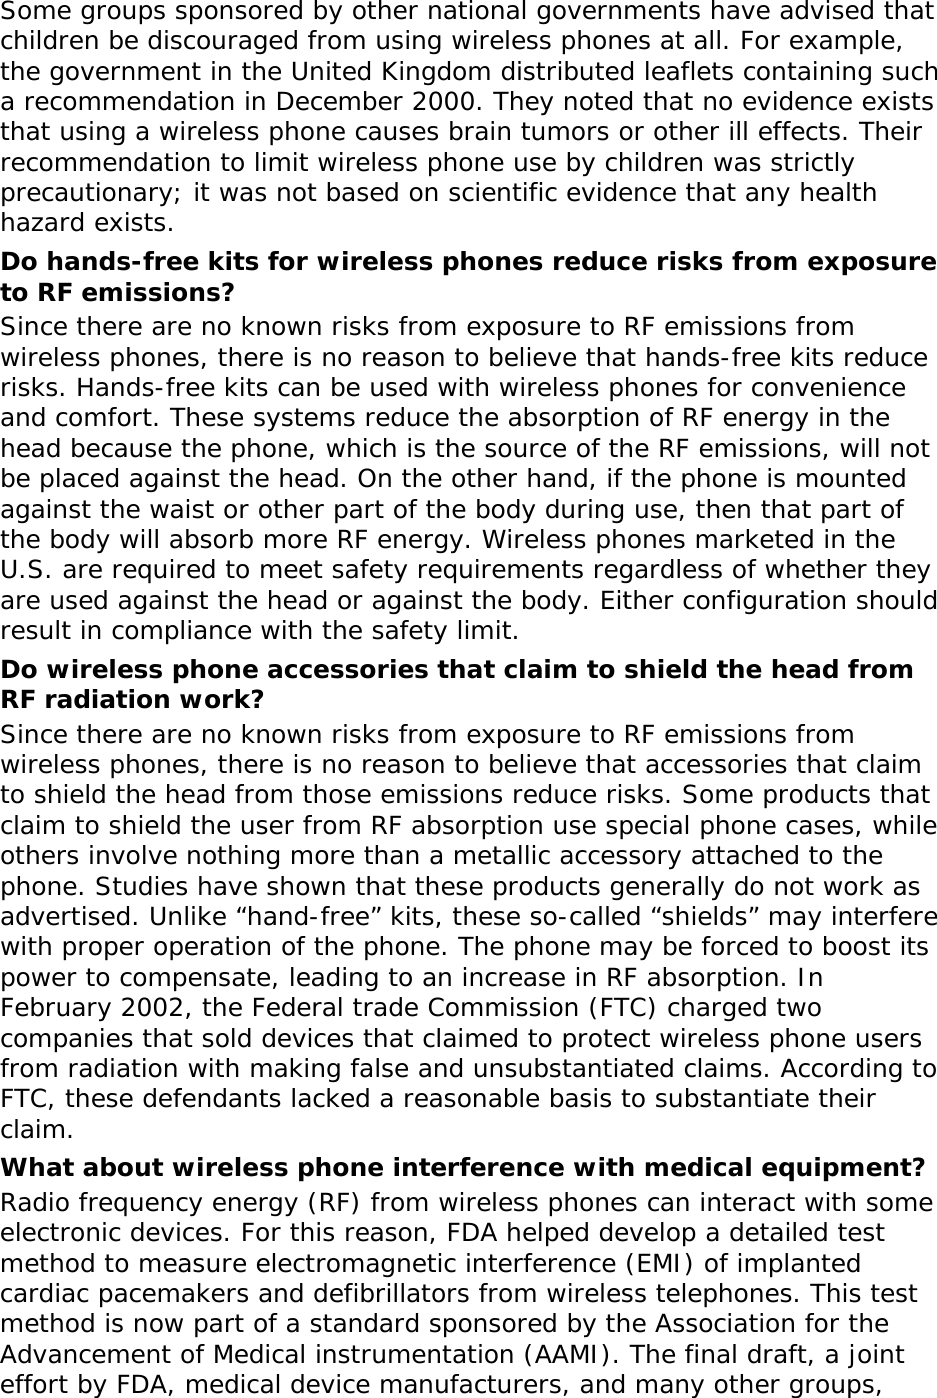 Some groups sponsored by other national governments have advised that children be discouraged from using wireless phones at all. For example, the government in the United Kingdom distributed leaflets containing such a recommendation in December 2000. They noted that no evidence exists that using a wireless phone causes brain tumors or other ill effects. Their recommendation to limit wireless phone use by children was strictly precautionary; it was not based on scientific evidence that any health hazard exists.  Do hands-free kits for wireless phones reduce risks from exposure to RF emissions? Since there are no known risks from exposure to RF emissions from wireless phones, there is no reason to believe that hands-free kits reduce risks. Hands-free kits can be used with wireless phones for convenience and comfort. These systems reduce the absorption of RF energy in the head because the phone, which is the source of the RF emissions, will not be placed against the head. On the other hand, if the phone is mounted against the waist or other part of the body during use, then that part of the body will absorb more RF energy. Wireless phones marketed in the U.S. are required to meet safety requirements regardless of whether they are used against the head or against the body. Either configuration should result in compliance with the safety limit. Do wireless phone accessories that claim to shield the head from RF radiation work? Since there are no known risks from exposure to RF emissions from wireless phones, there is no reason to believe that accessories that claim to shield the head from those emissions reduce risks. Some products that claim to shield the user from RF absorption use special phone cases, while others involve nothing more than a metallic accessory attached to the phone. Studies have shown that these products generally do not work as advertised. Unlike “hand-free” kits, these so-called “shields” may interfere with proper operation of the phone. The phone may be forced to boost its power to compensate, leading to an increase in RF absorption. In February 2002, the Federal trade Commission (FTC) charged two companies that sold devices that claimed to protect wireless phone users from radiation with making false and unsubstantiated claims. According to FTC, these defendants lacked a reasonable basis to substantiate their claim. What about wireless phone interference with medical equipment? Radio frequency energy (RF) from wireless phones can interact with some electronic devices. For this reason, FDA helped develop a detailed test method to measure electromagnetic interference (EMI) of implanted cardiac pacemakers and defibrillators from wireless telephones. This test method is now part of a standard sponsored by the Association for the Advancement of Medical instrumentation (AAMI). The final draft, a joint effort by FDA, medical device manufacturers, and many other groups, 